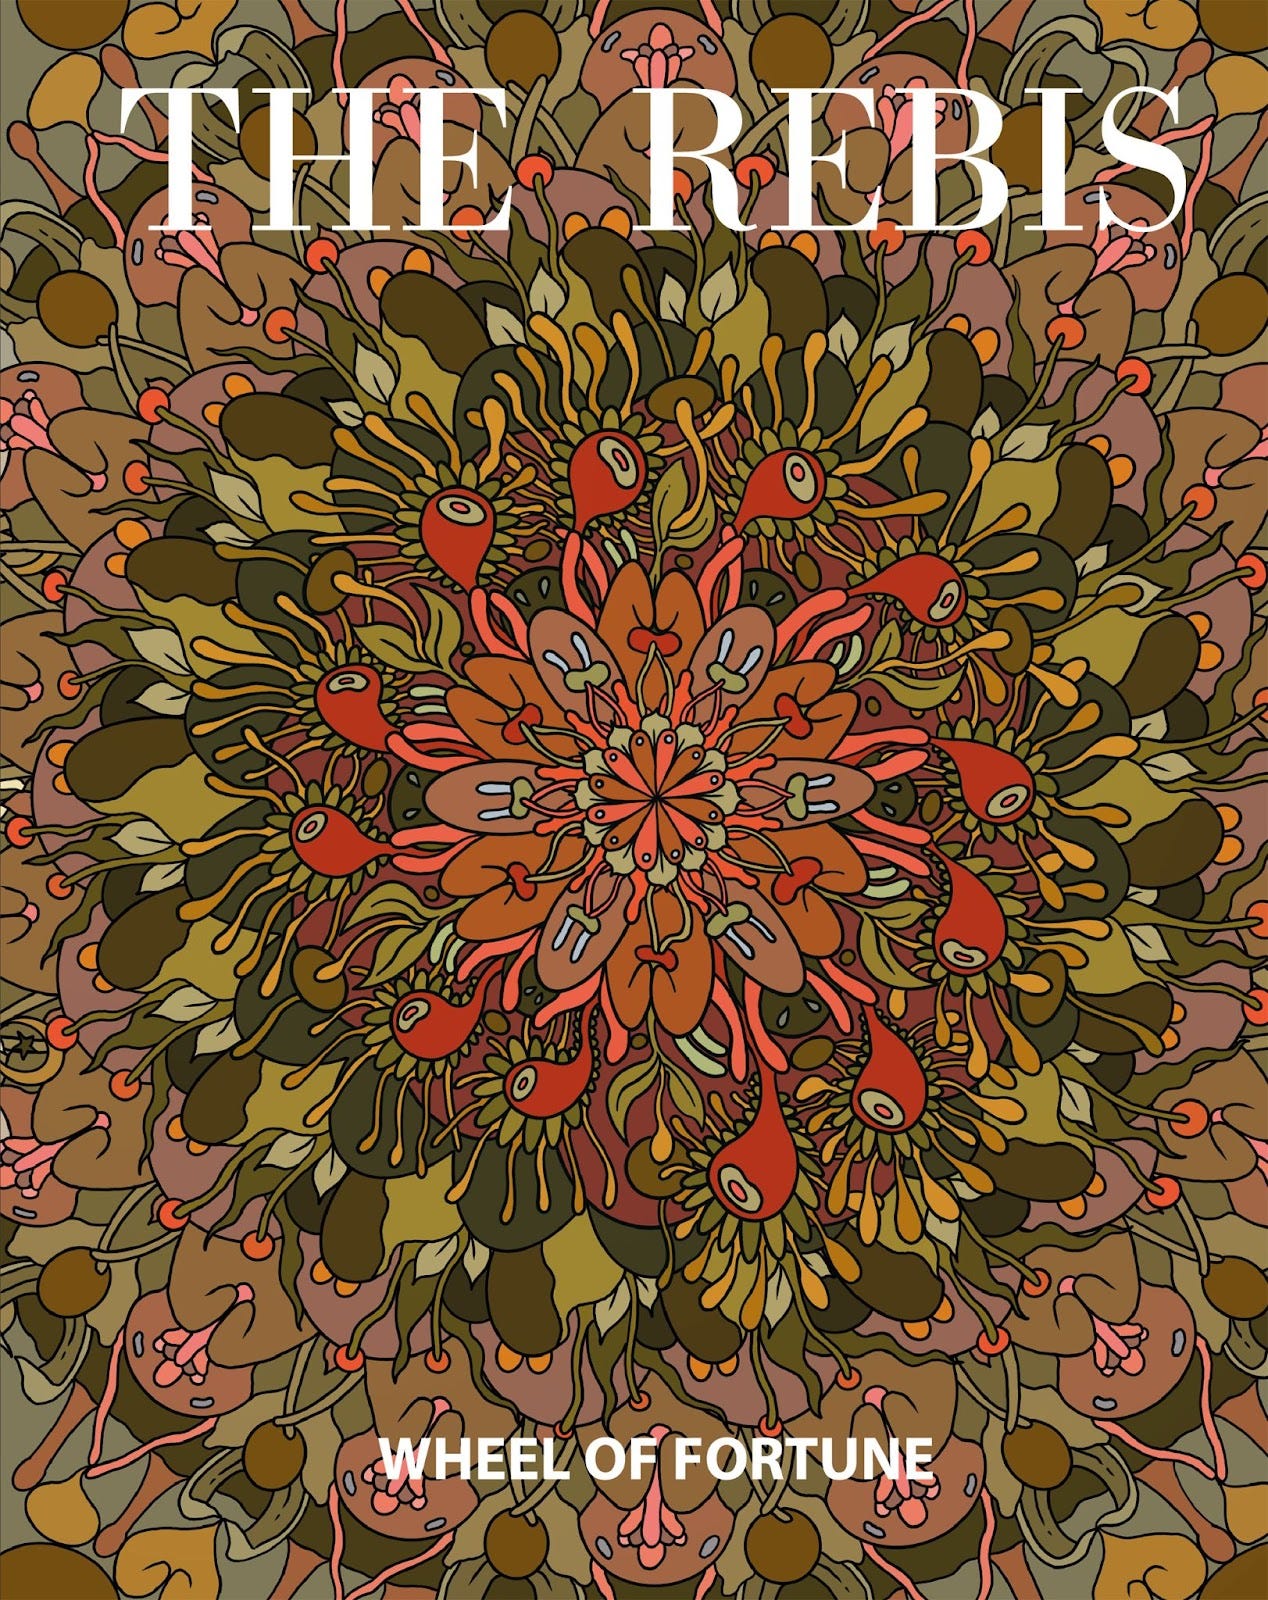 The cover art for The Rebis: Wheel of Fortune, featuring an earth-toned mandala made up of leaves and other organic shapes that are green, brown, and red in color.